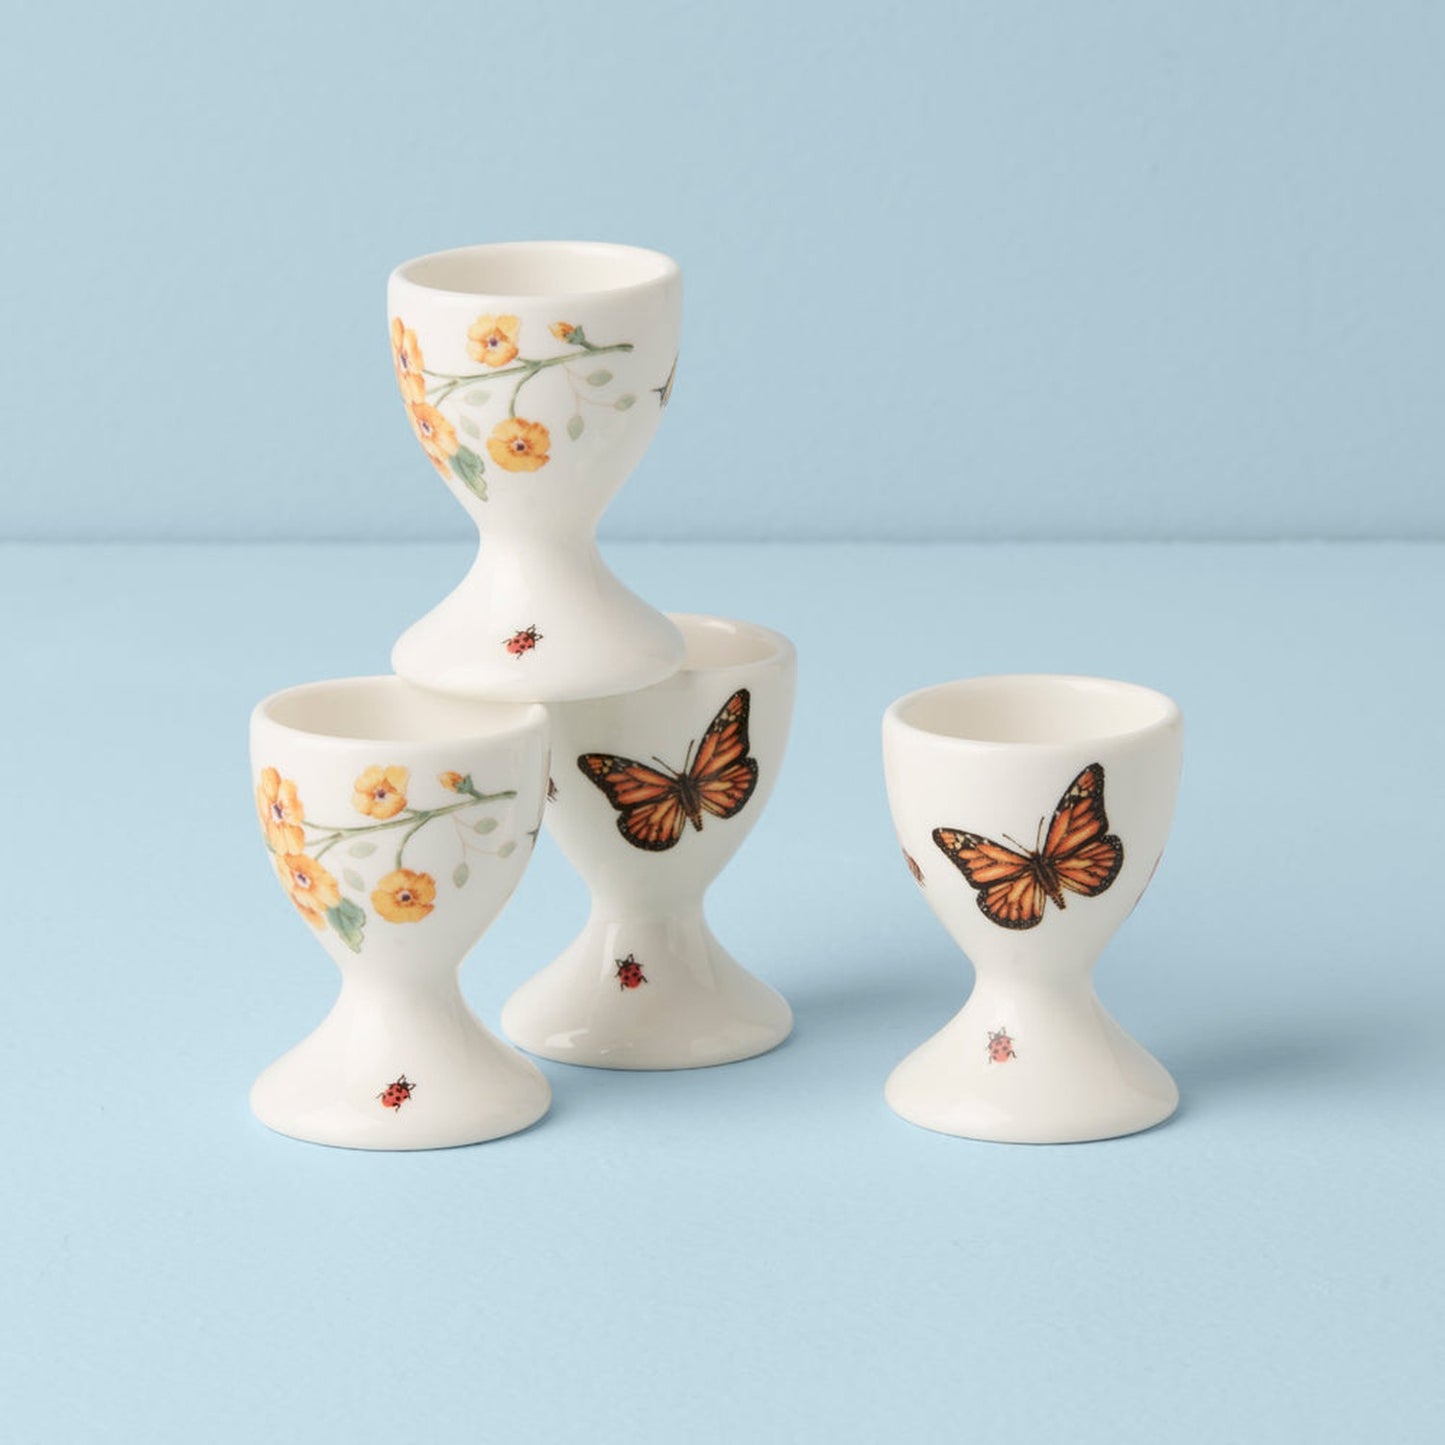 Lenox Butterfly Meadow Footed Egg Cups, Set Of 4